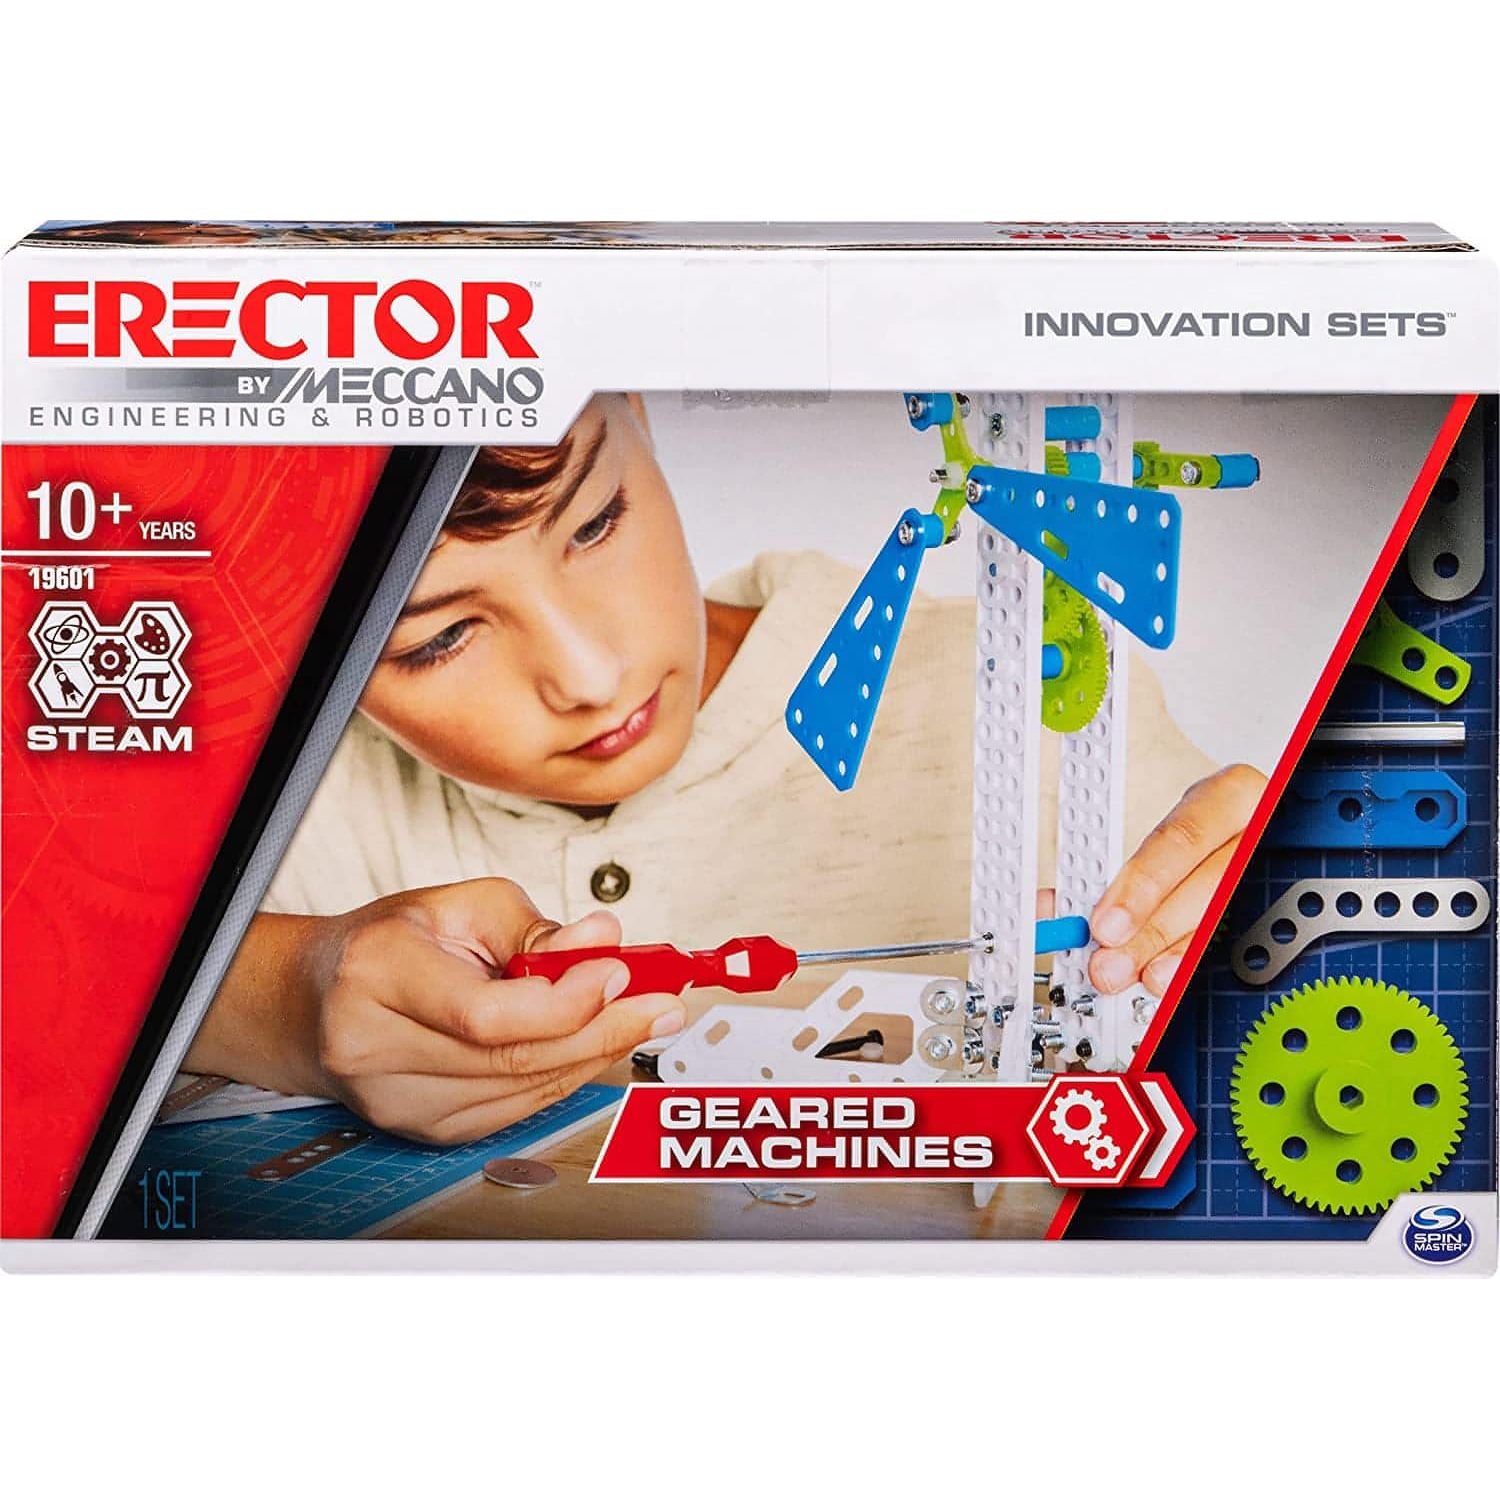 Meccano Erector by Geared Machines S.T.E.A.M. Building Kit with Moving Parts - Brandat Outlet